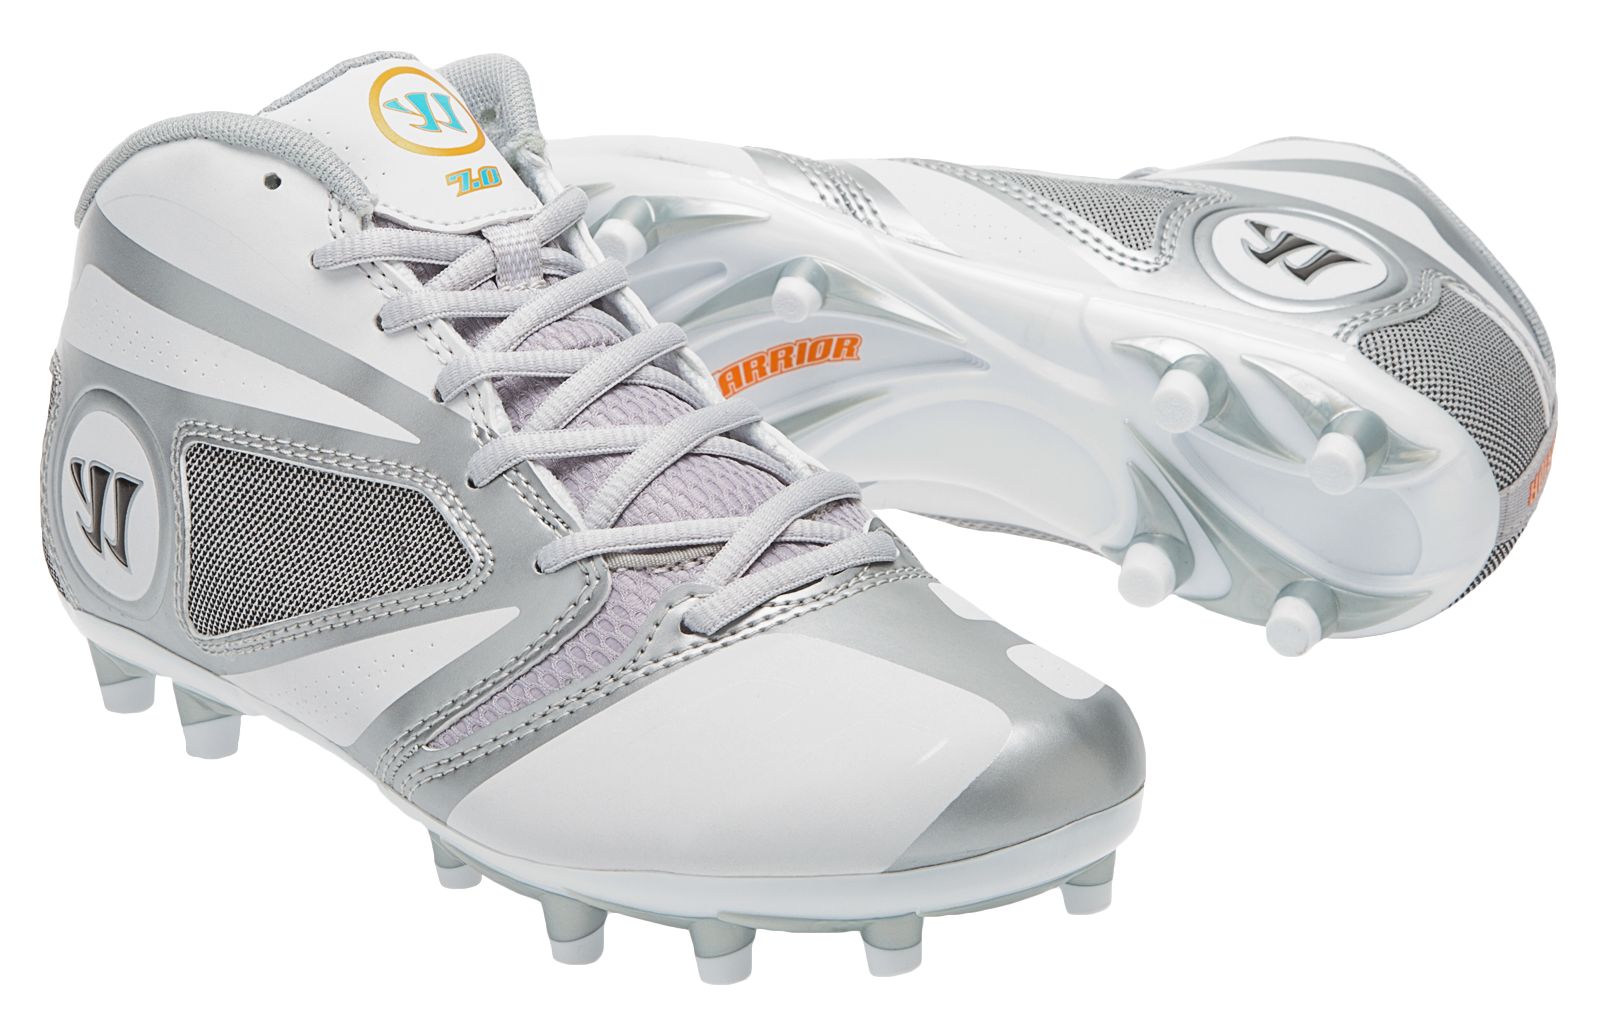 Burn 7.0 Jr. Cleat, White with Silver image number 3